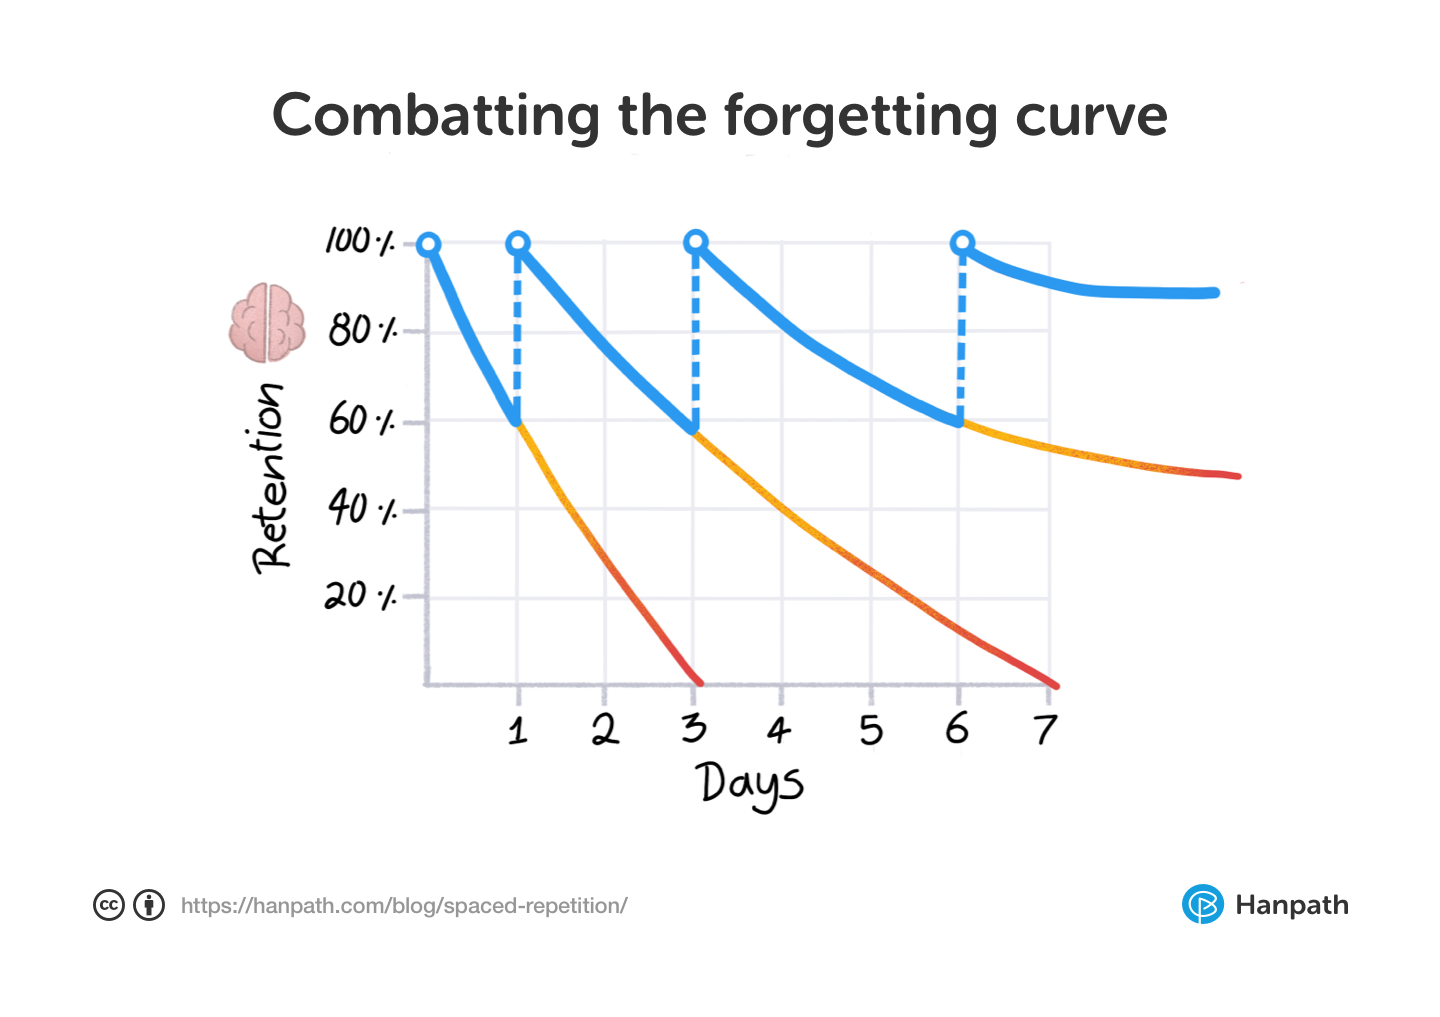 Combatting the forgetting curve